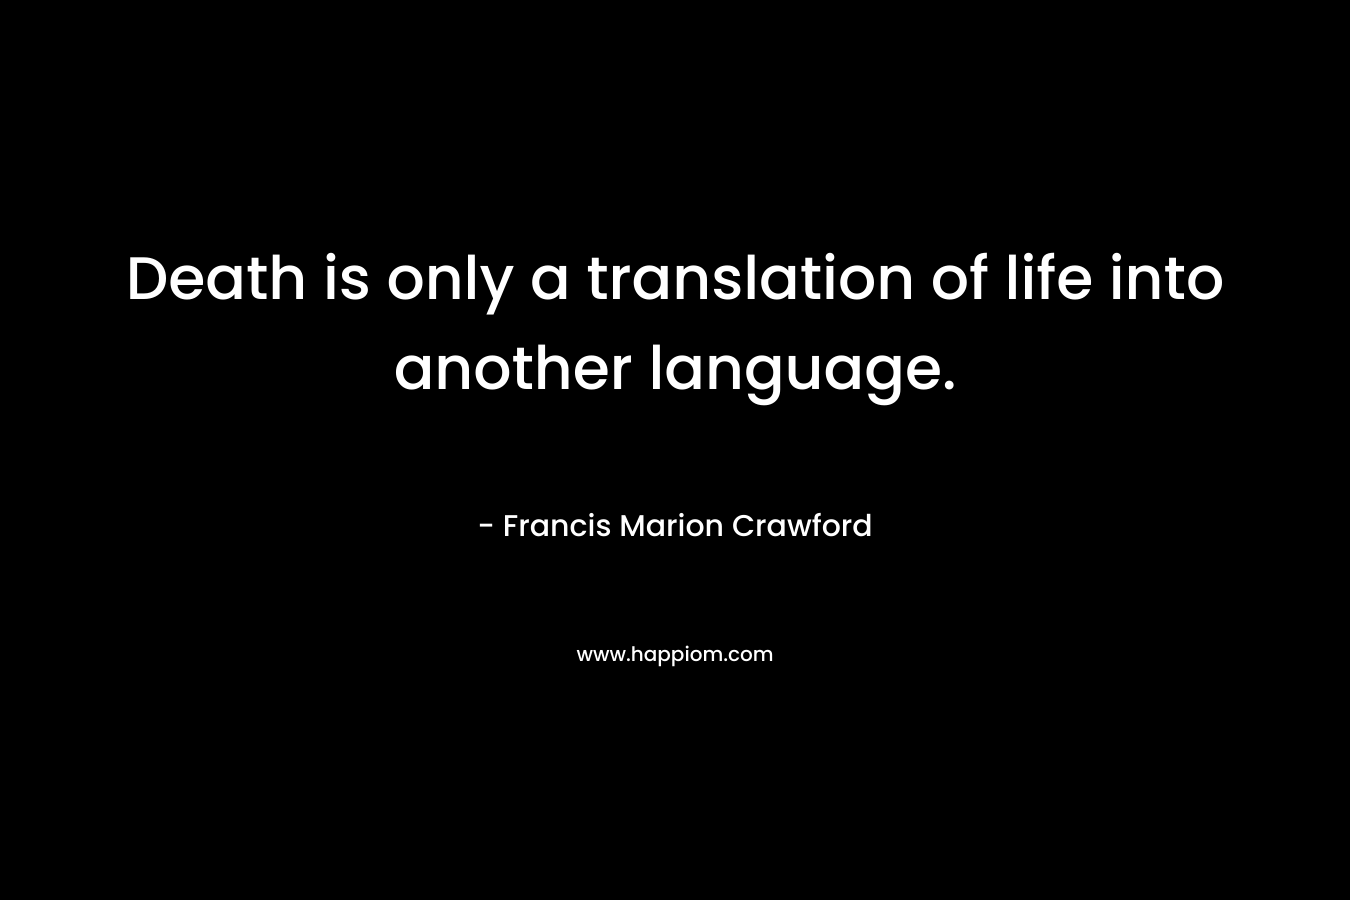 Death is only a translation of life into another language.